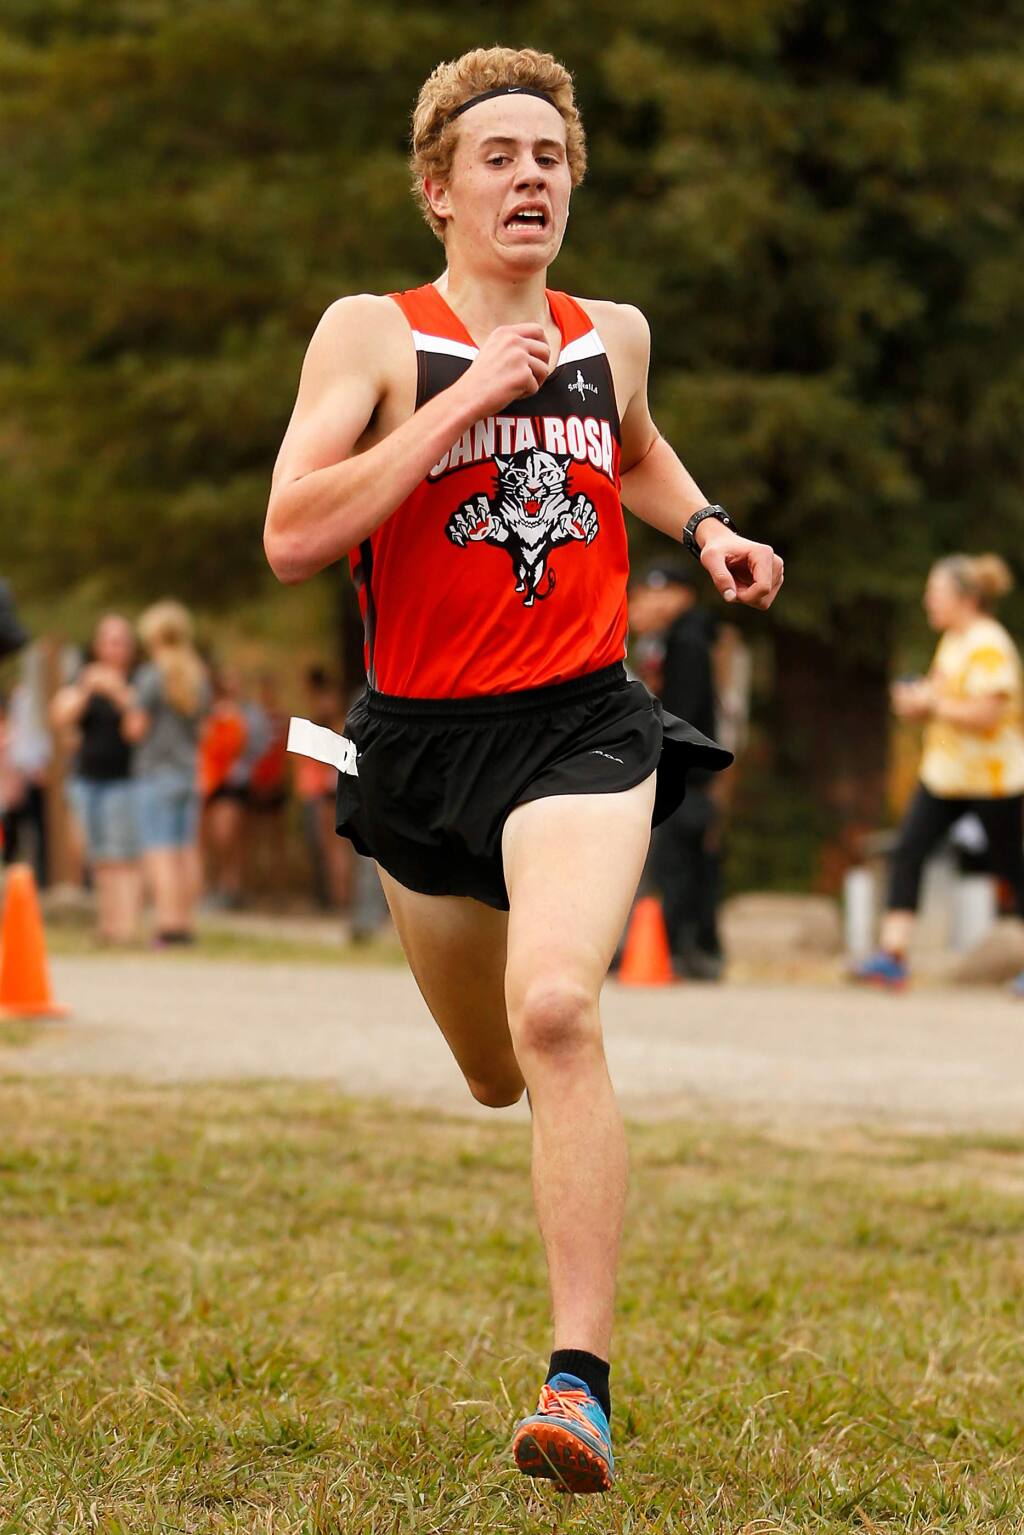 Santa Rosa's Andrew McKamey wins first place with a time of 15:32.6 during a North Bay League-Oak Division cross country meet, at Spring Lake Park in Santa Rosa, California, on Wednesday, October 16, 2019. (Alvin Jornada / The Press Democrat)